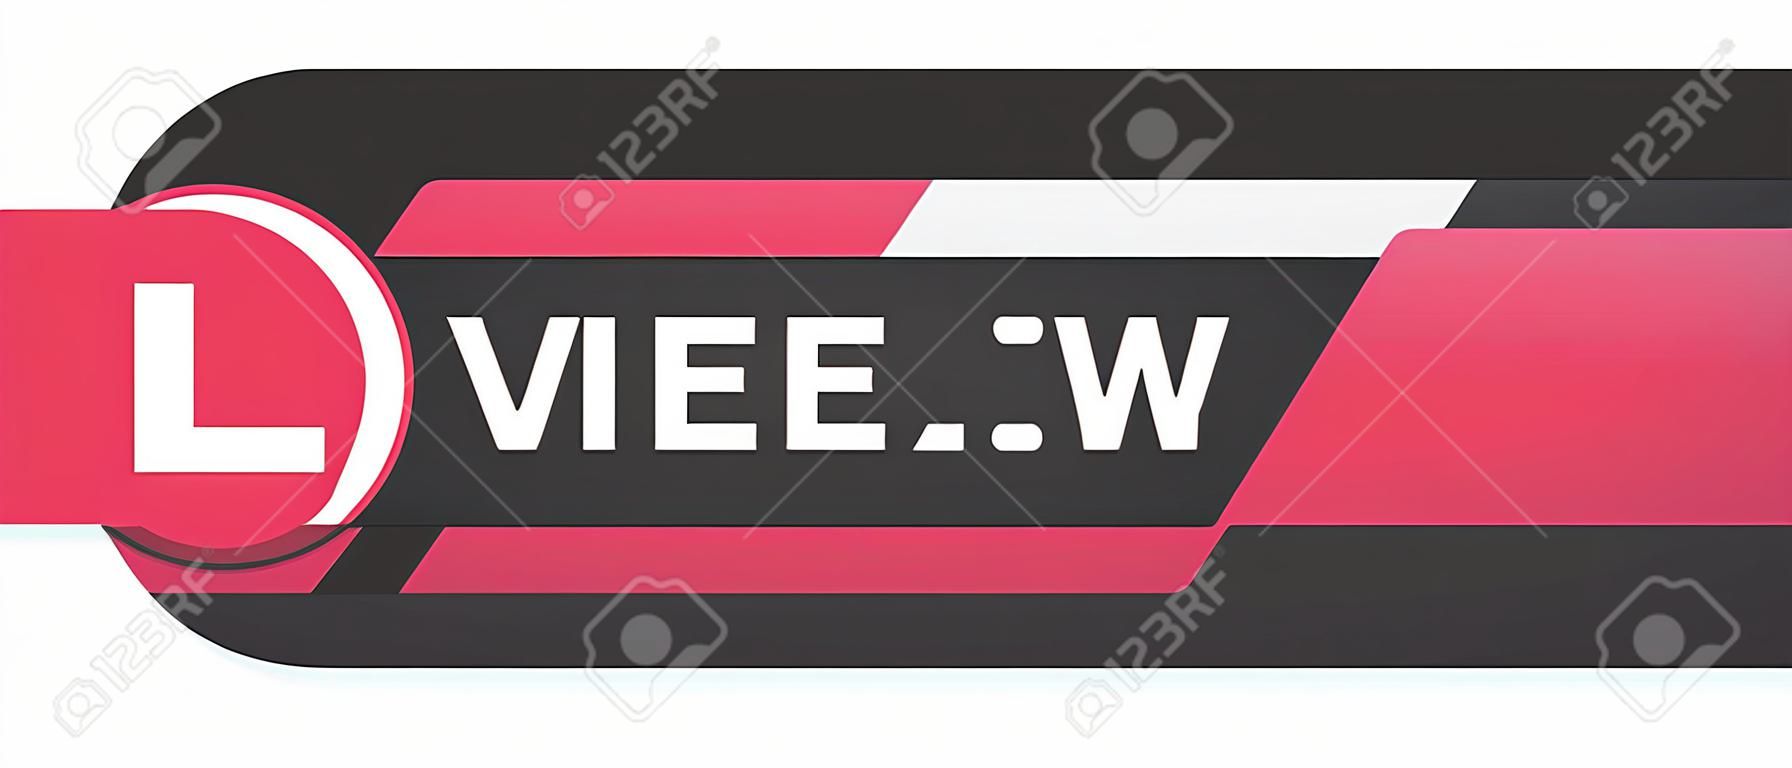 Red Live streaming logo - vector design element with play button for news and TV or online broadcasting